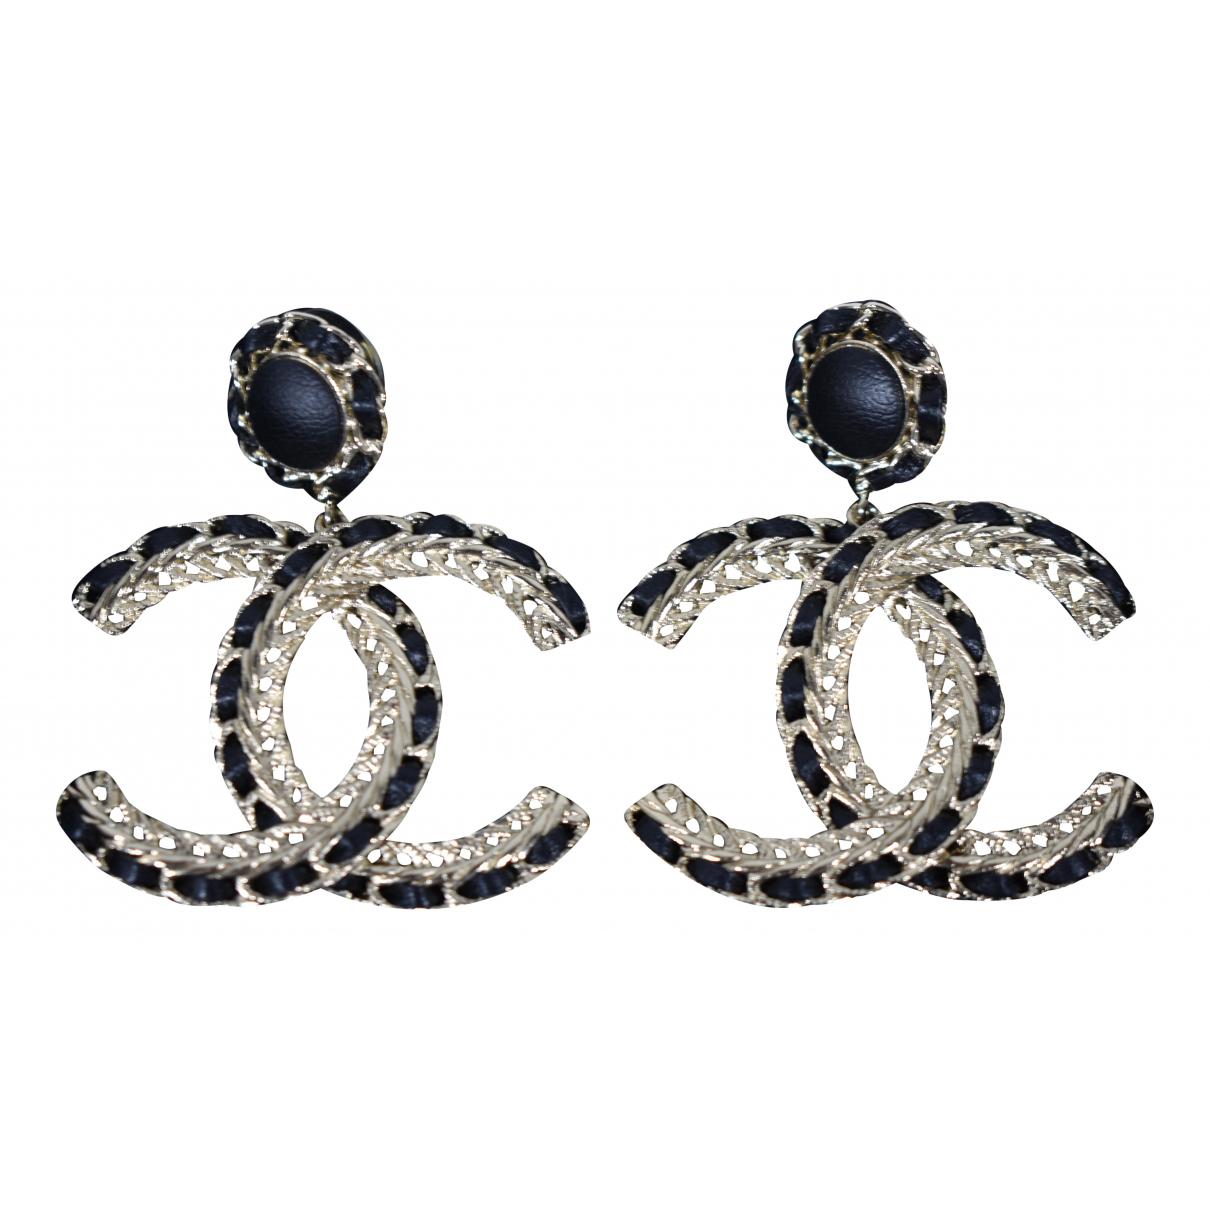 Chanel Brand New Gold Twisted Crystal Piercing Earrings